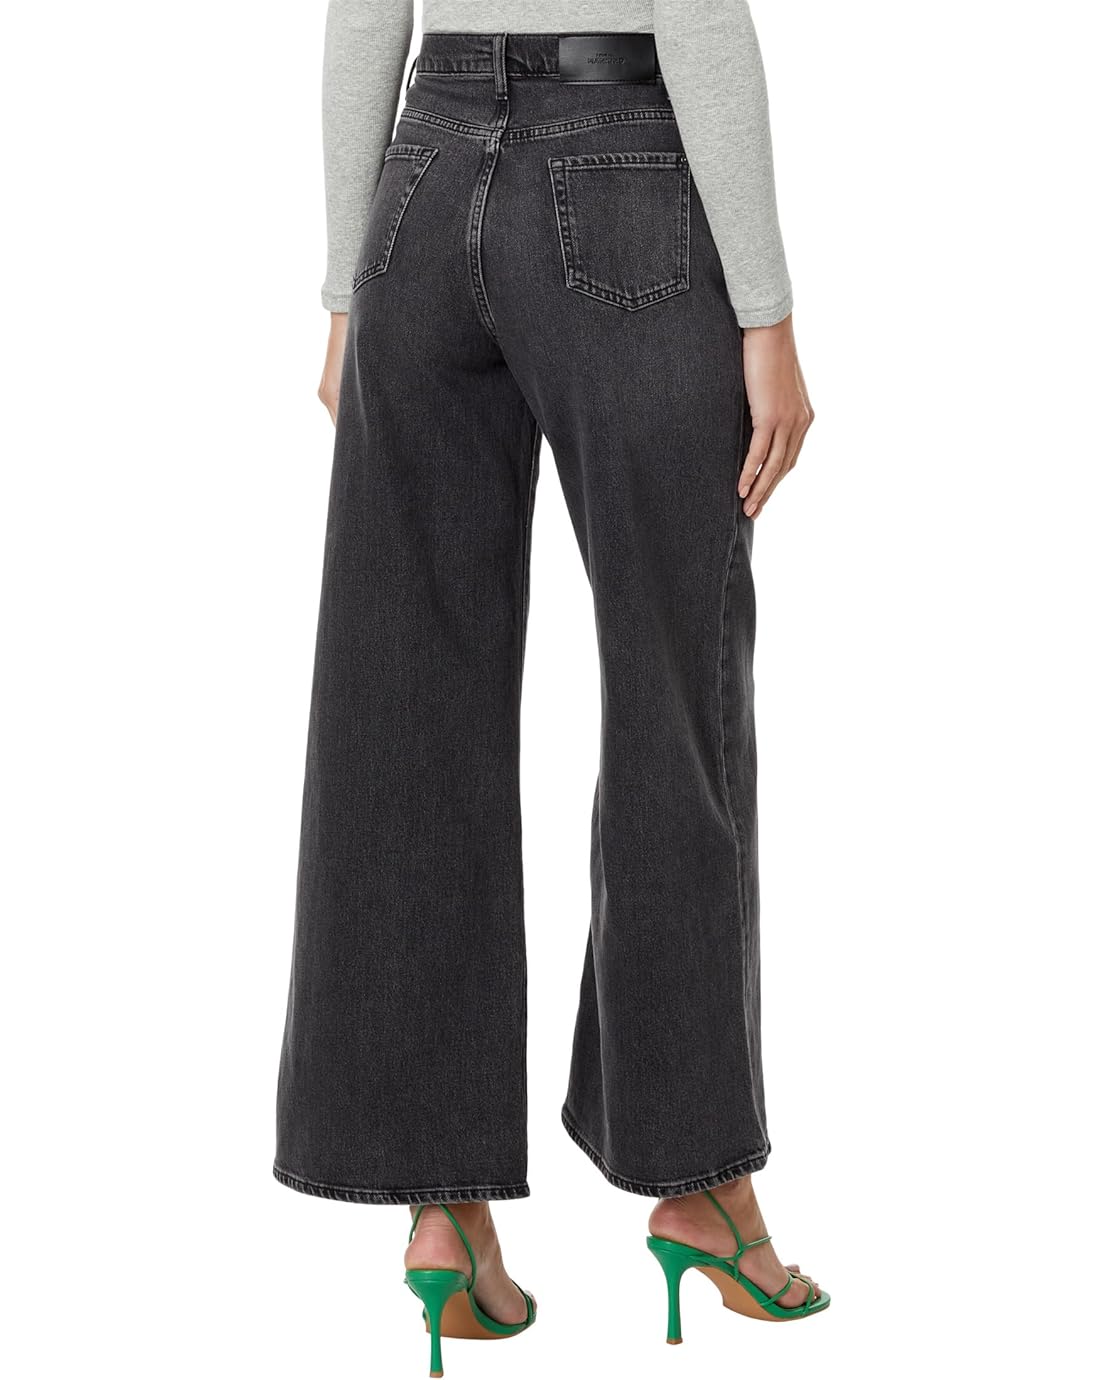  7 For All Mankind Zoey in Licorice